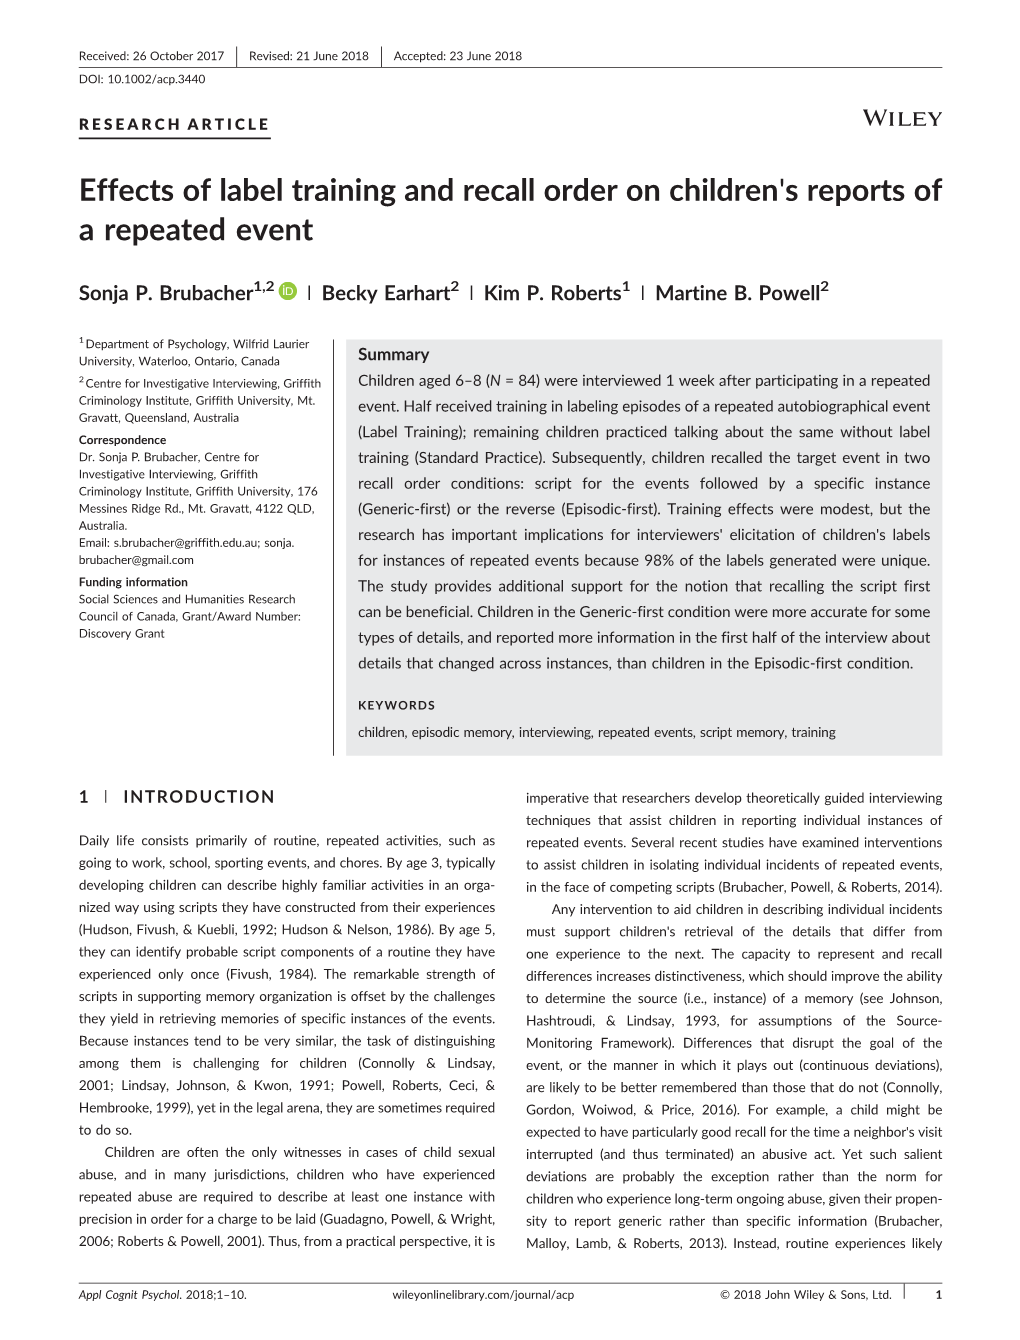 Effects of Label Training and Recall Order on Children's Reports of a Repeated Event